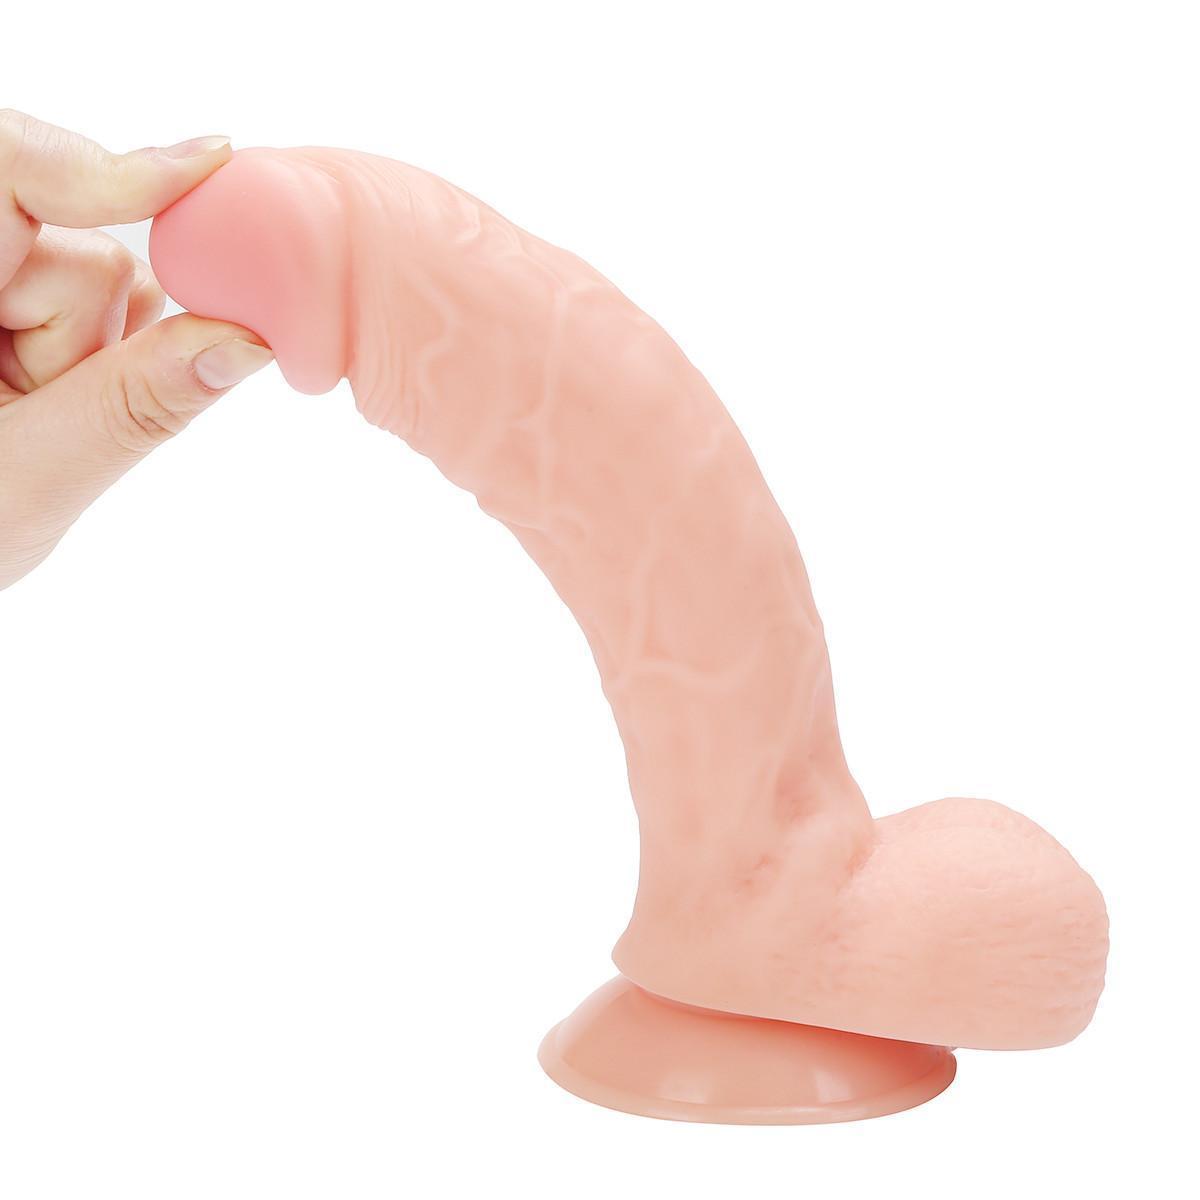 Simulated large penis, 9-inch thick suction cup, female masturbation wl270